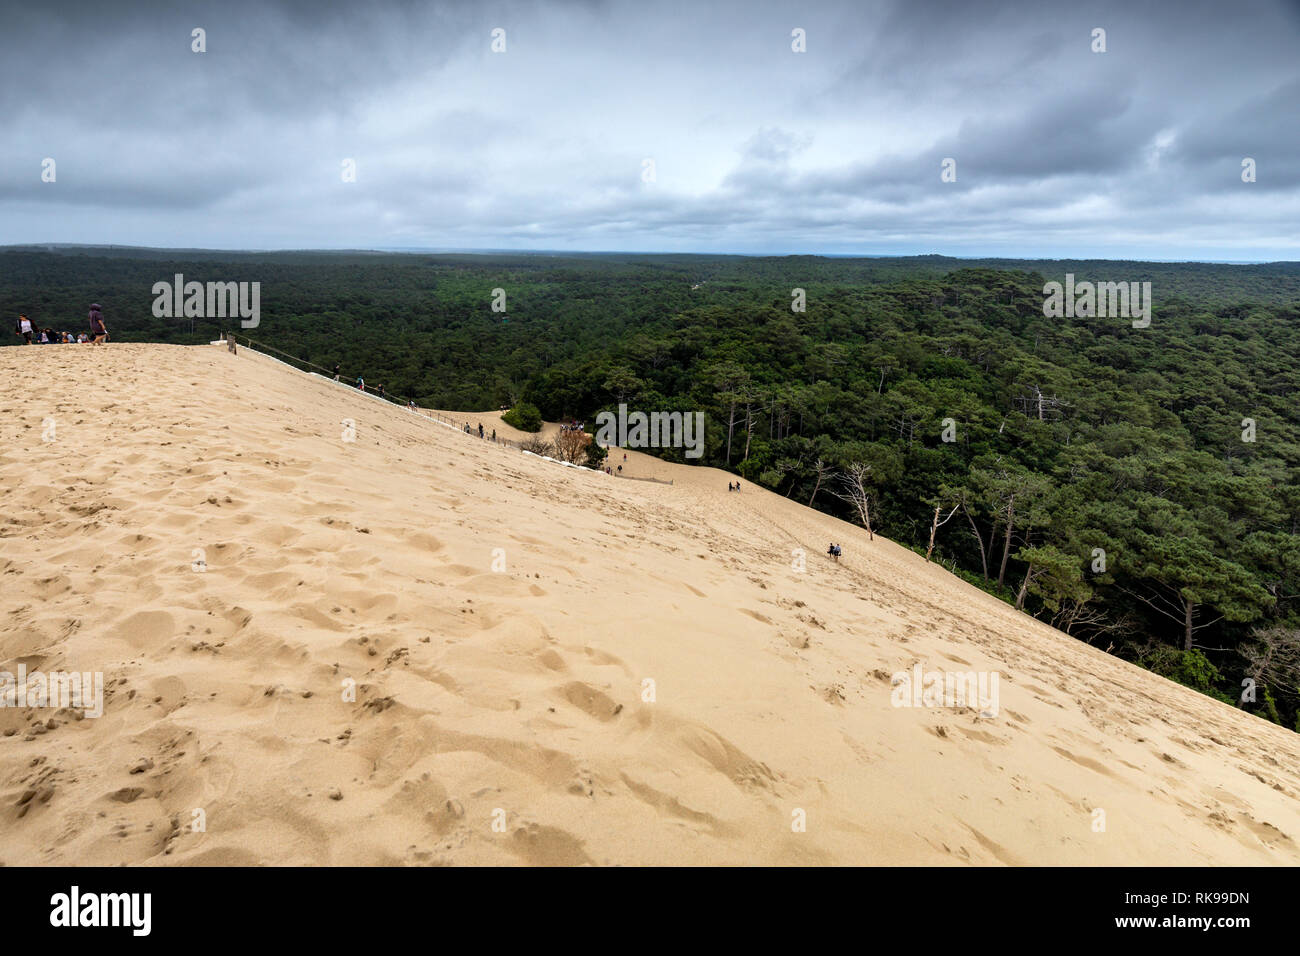 The Dune of Pilat The the tallest sand dune in Europe located in La Teste-de-Buch in the Arcachon Bay area France,  60 km from Bordeaux Stock Photo